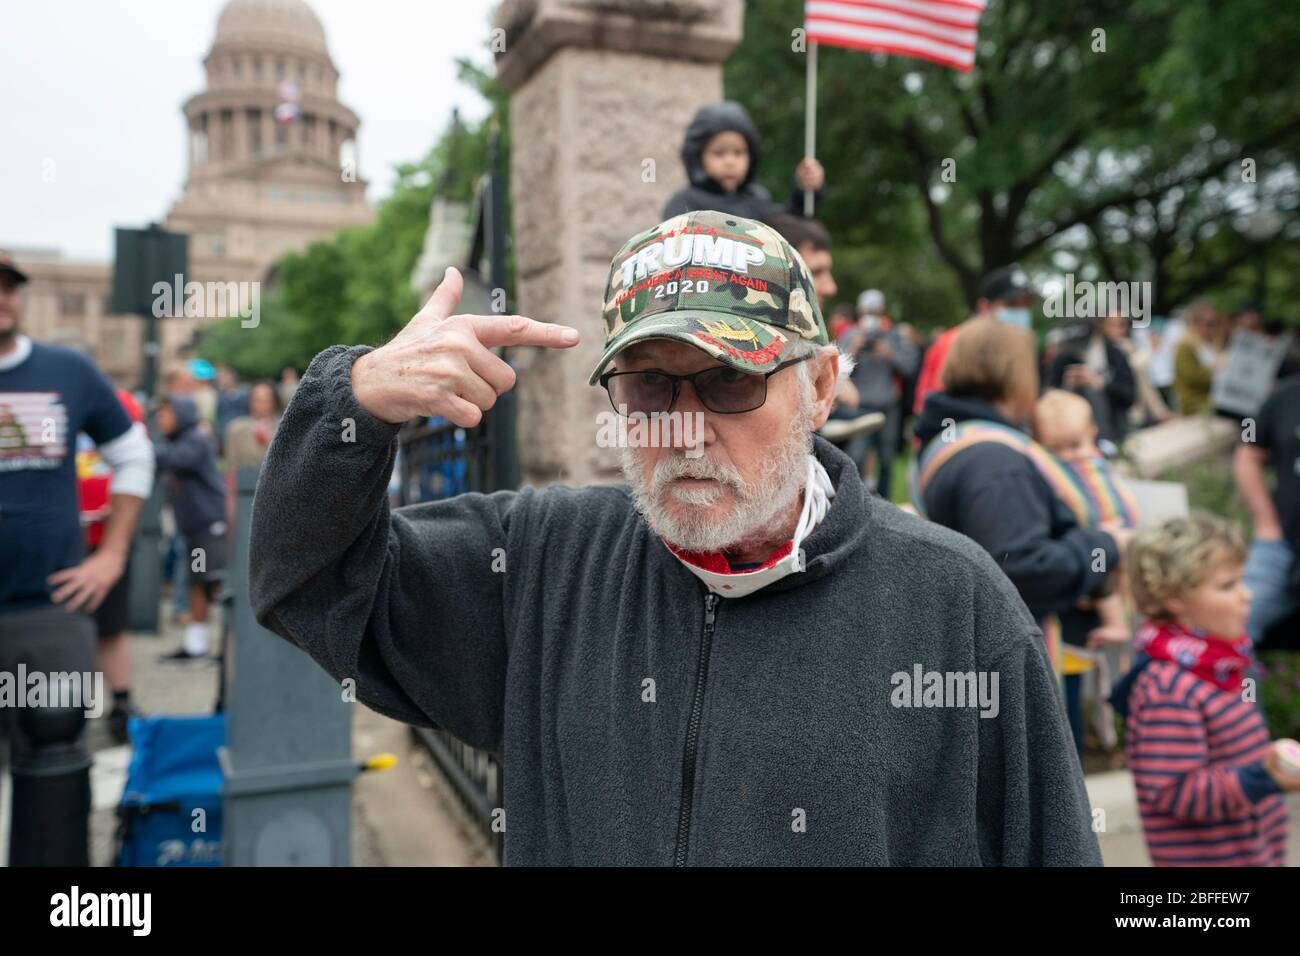 A man pointing to his 'Trump 2020' hat joins a few hundred Texans flouting social distancing guidelines at the Texas Capitol during a 'You Can't Close America' rally encouraged by the alt-right website Infowars. Attendees protested government policies aimed at slowing the spread of the coronavirus as overly restrictive and a violation of Americans' constitutional rights. Stock Photo